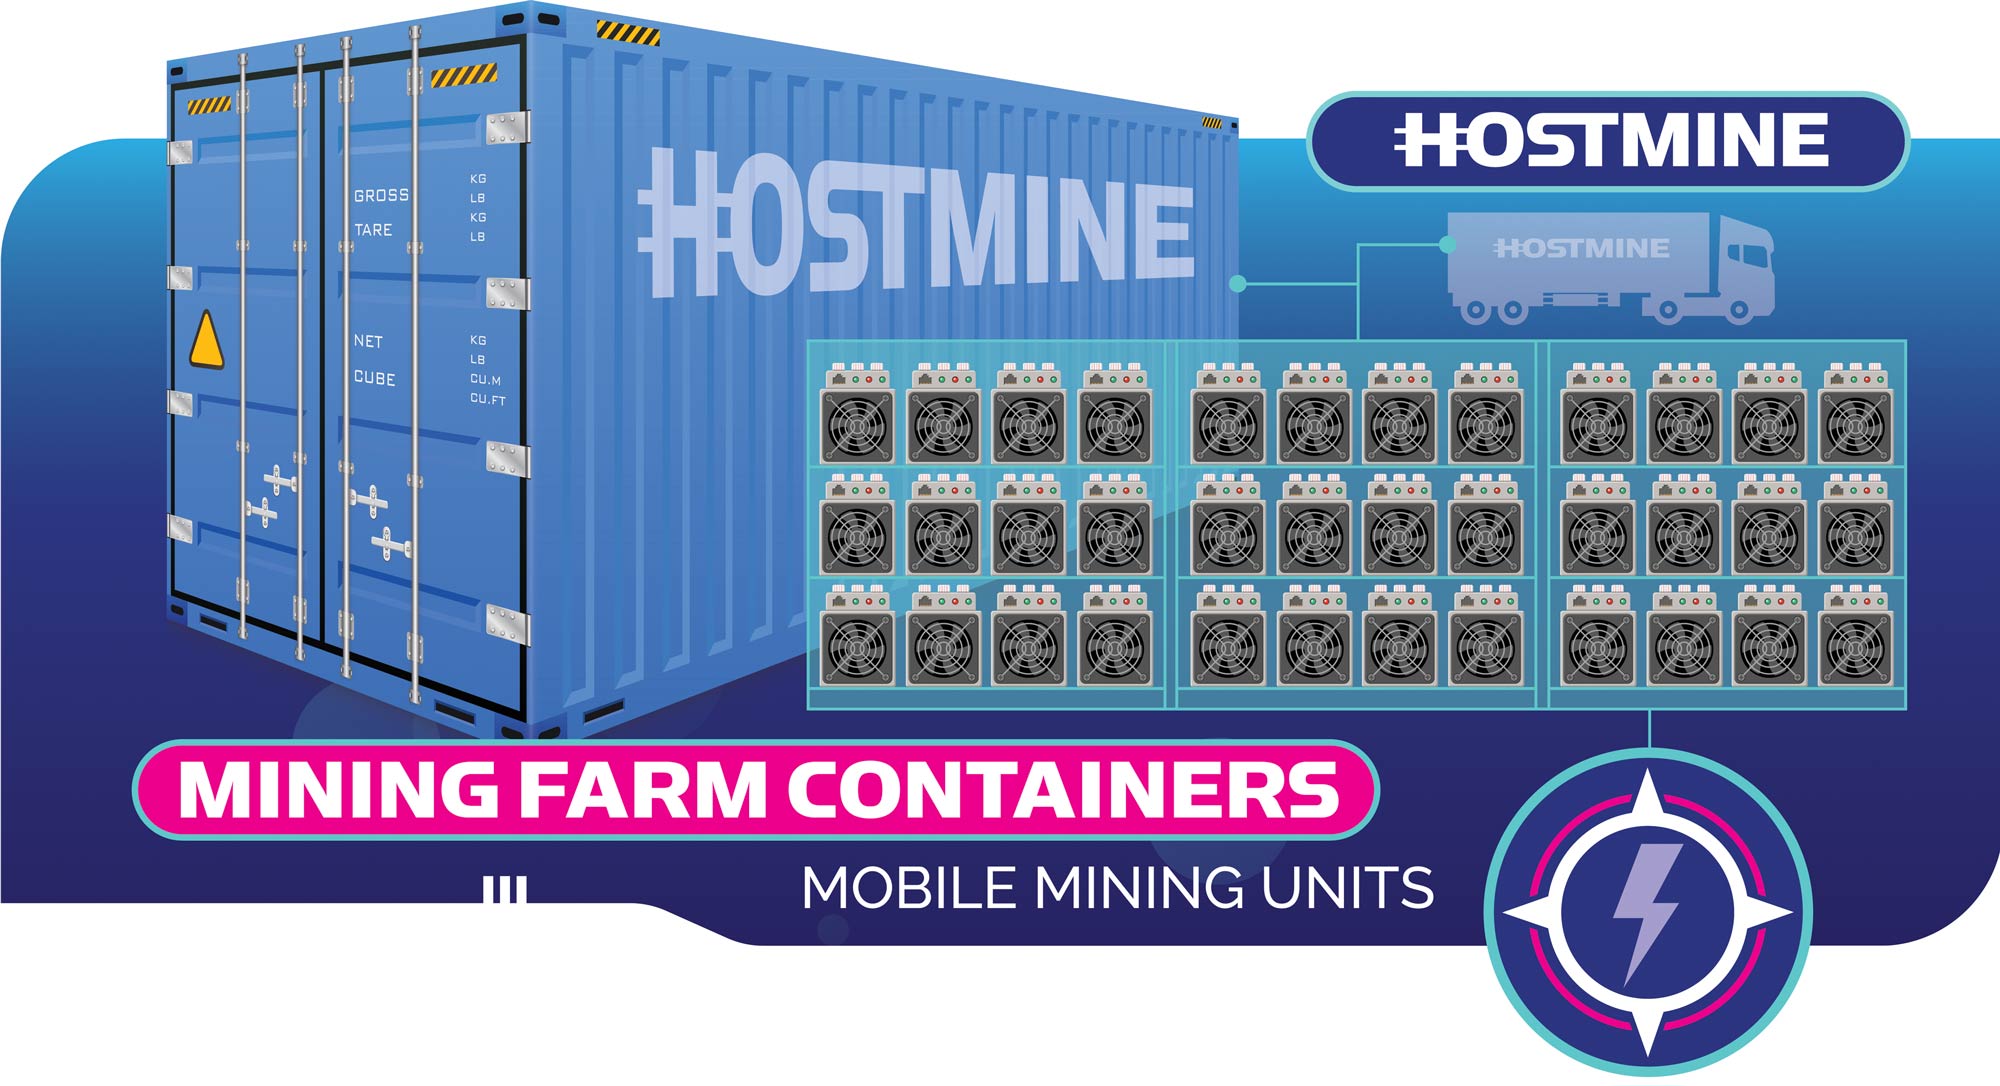 Mining Farm Containers | Hostmine